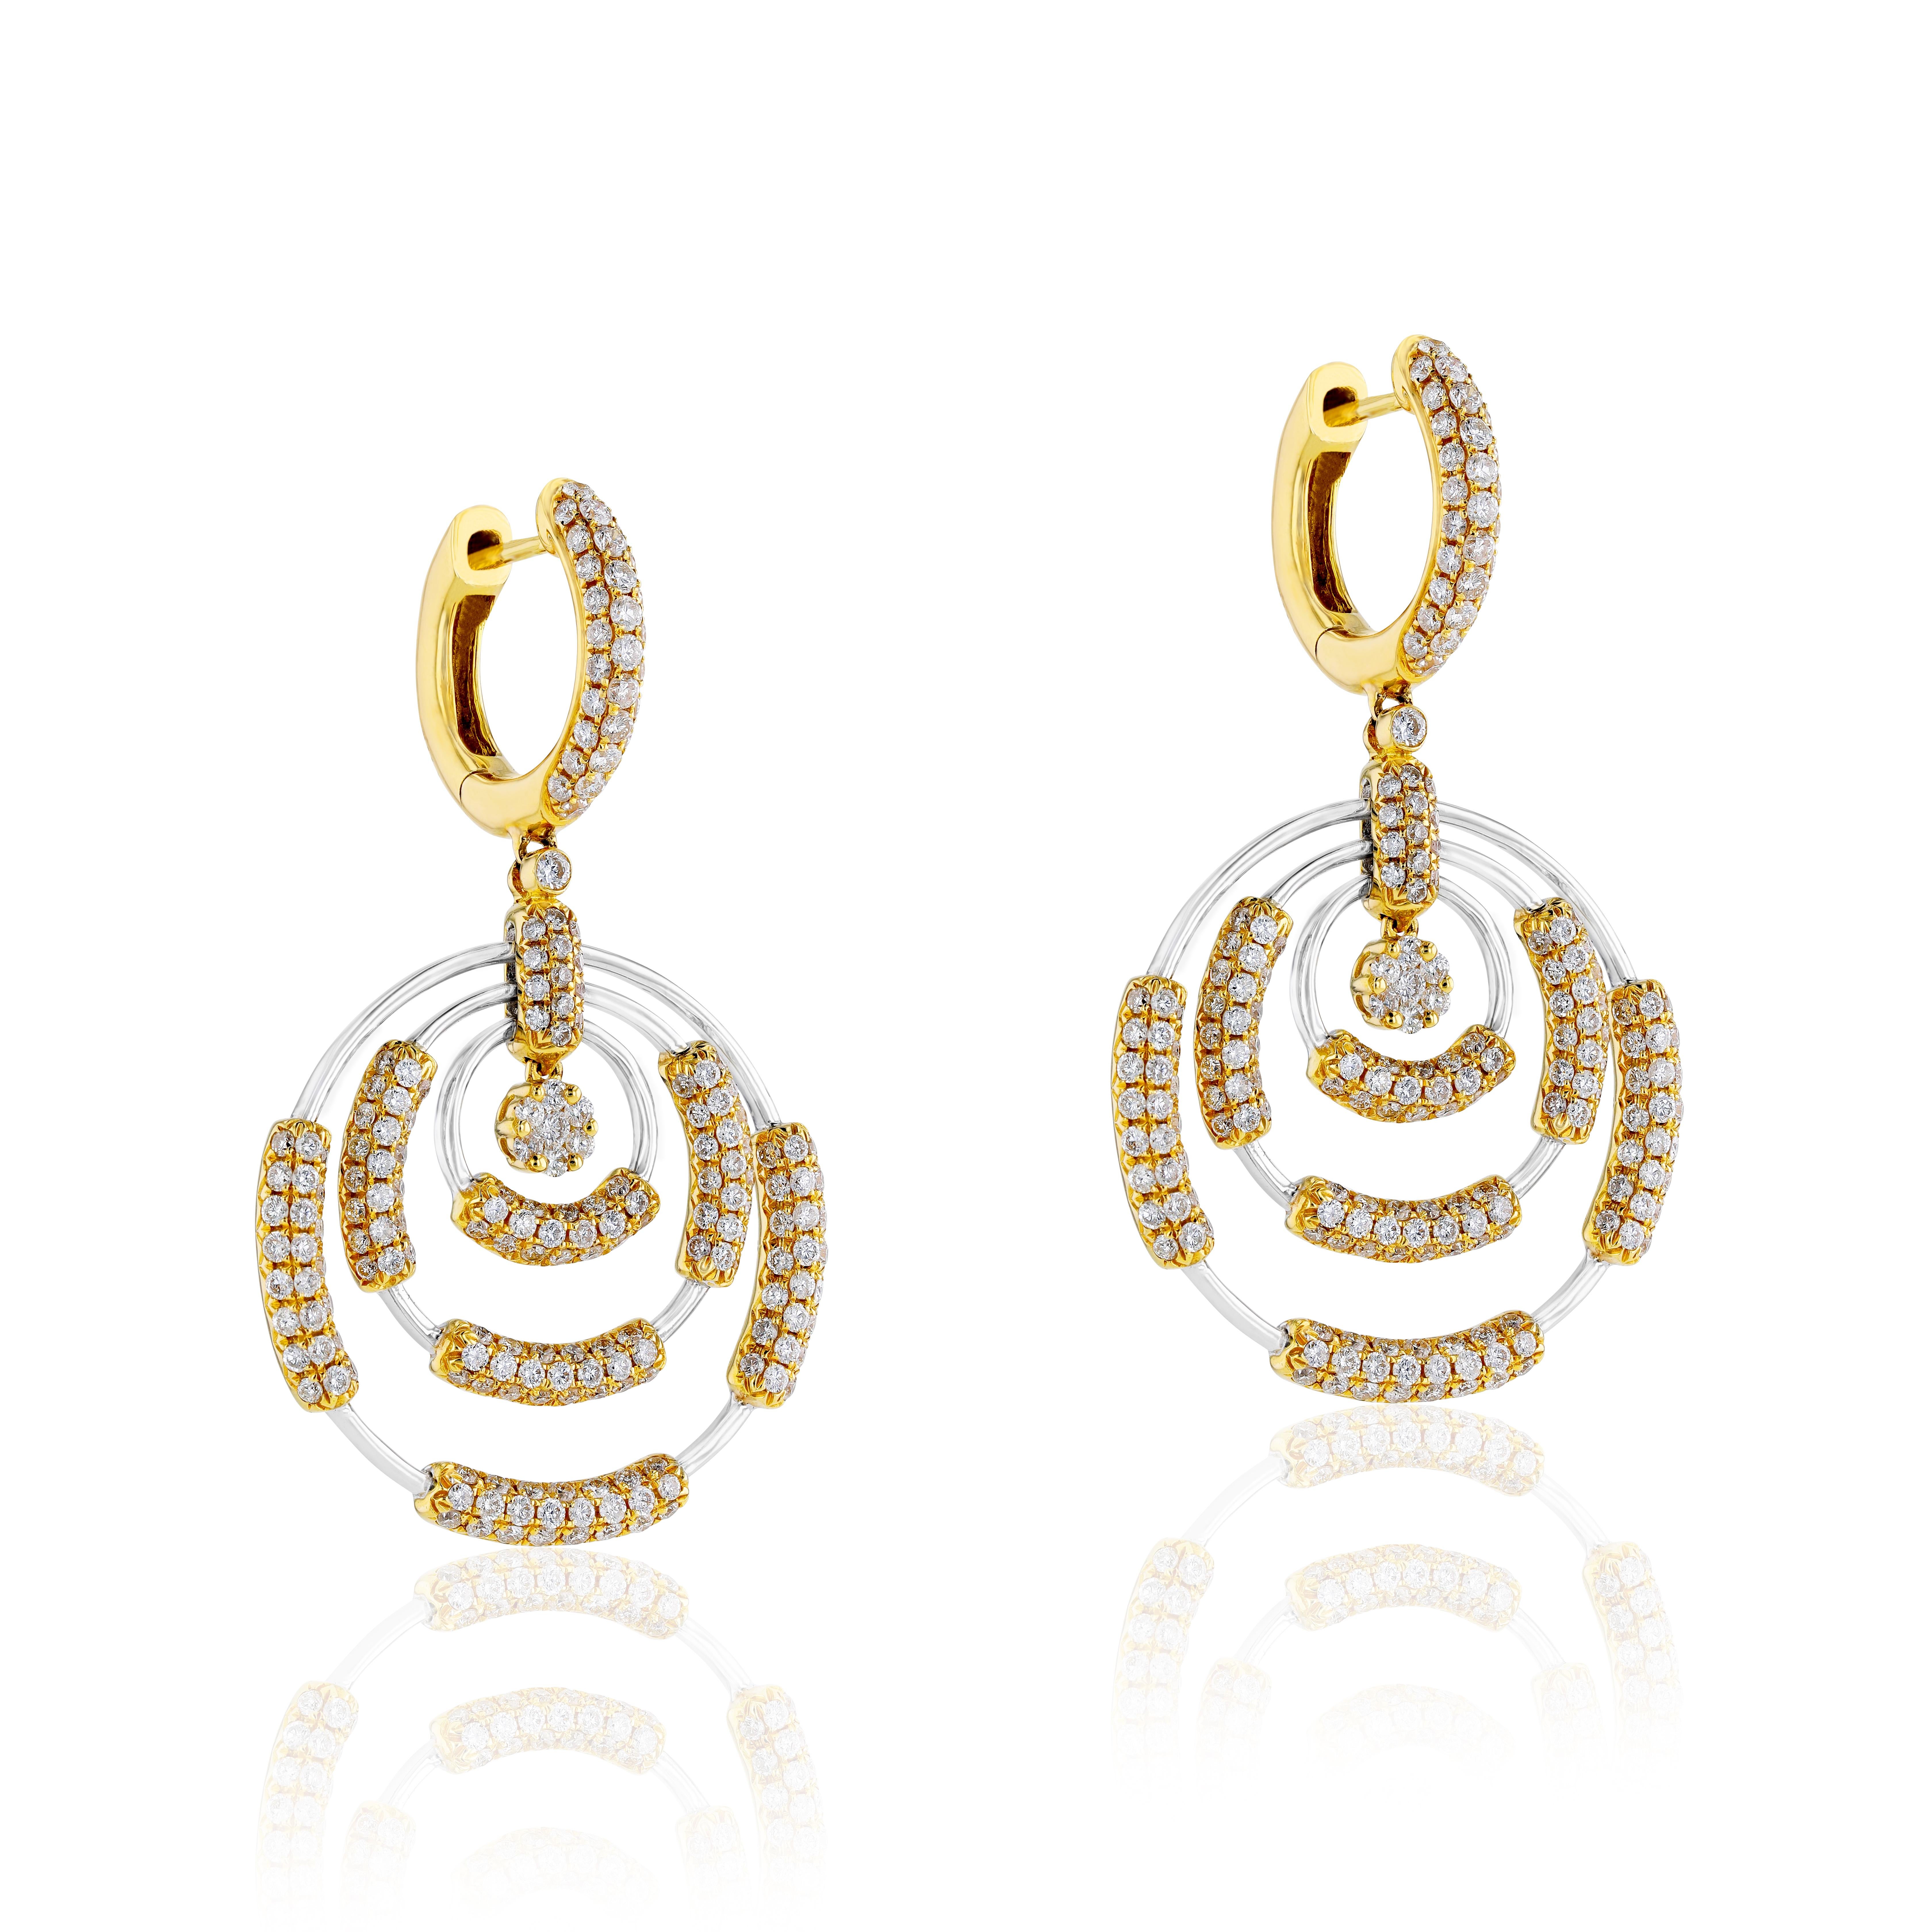 These timeless gold earrings from Amwaj Jewelry feature two round diamonds weighing 3.7 carats which form the centrepiece of the classically elegant 18 karat white gold earrings, framed by a radiant halo of yellow gold and small round white